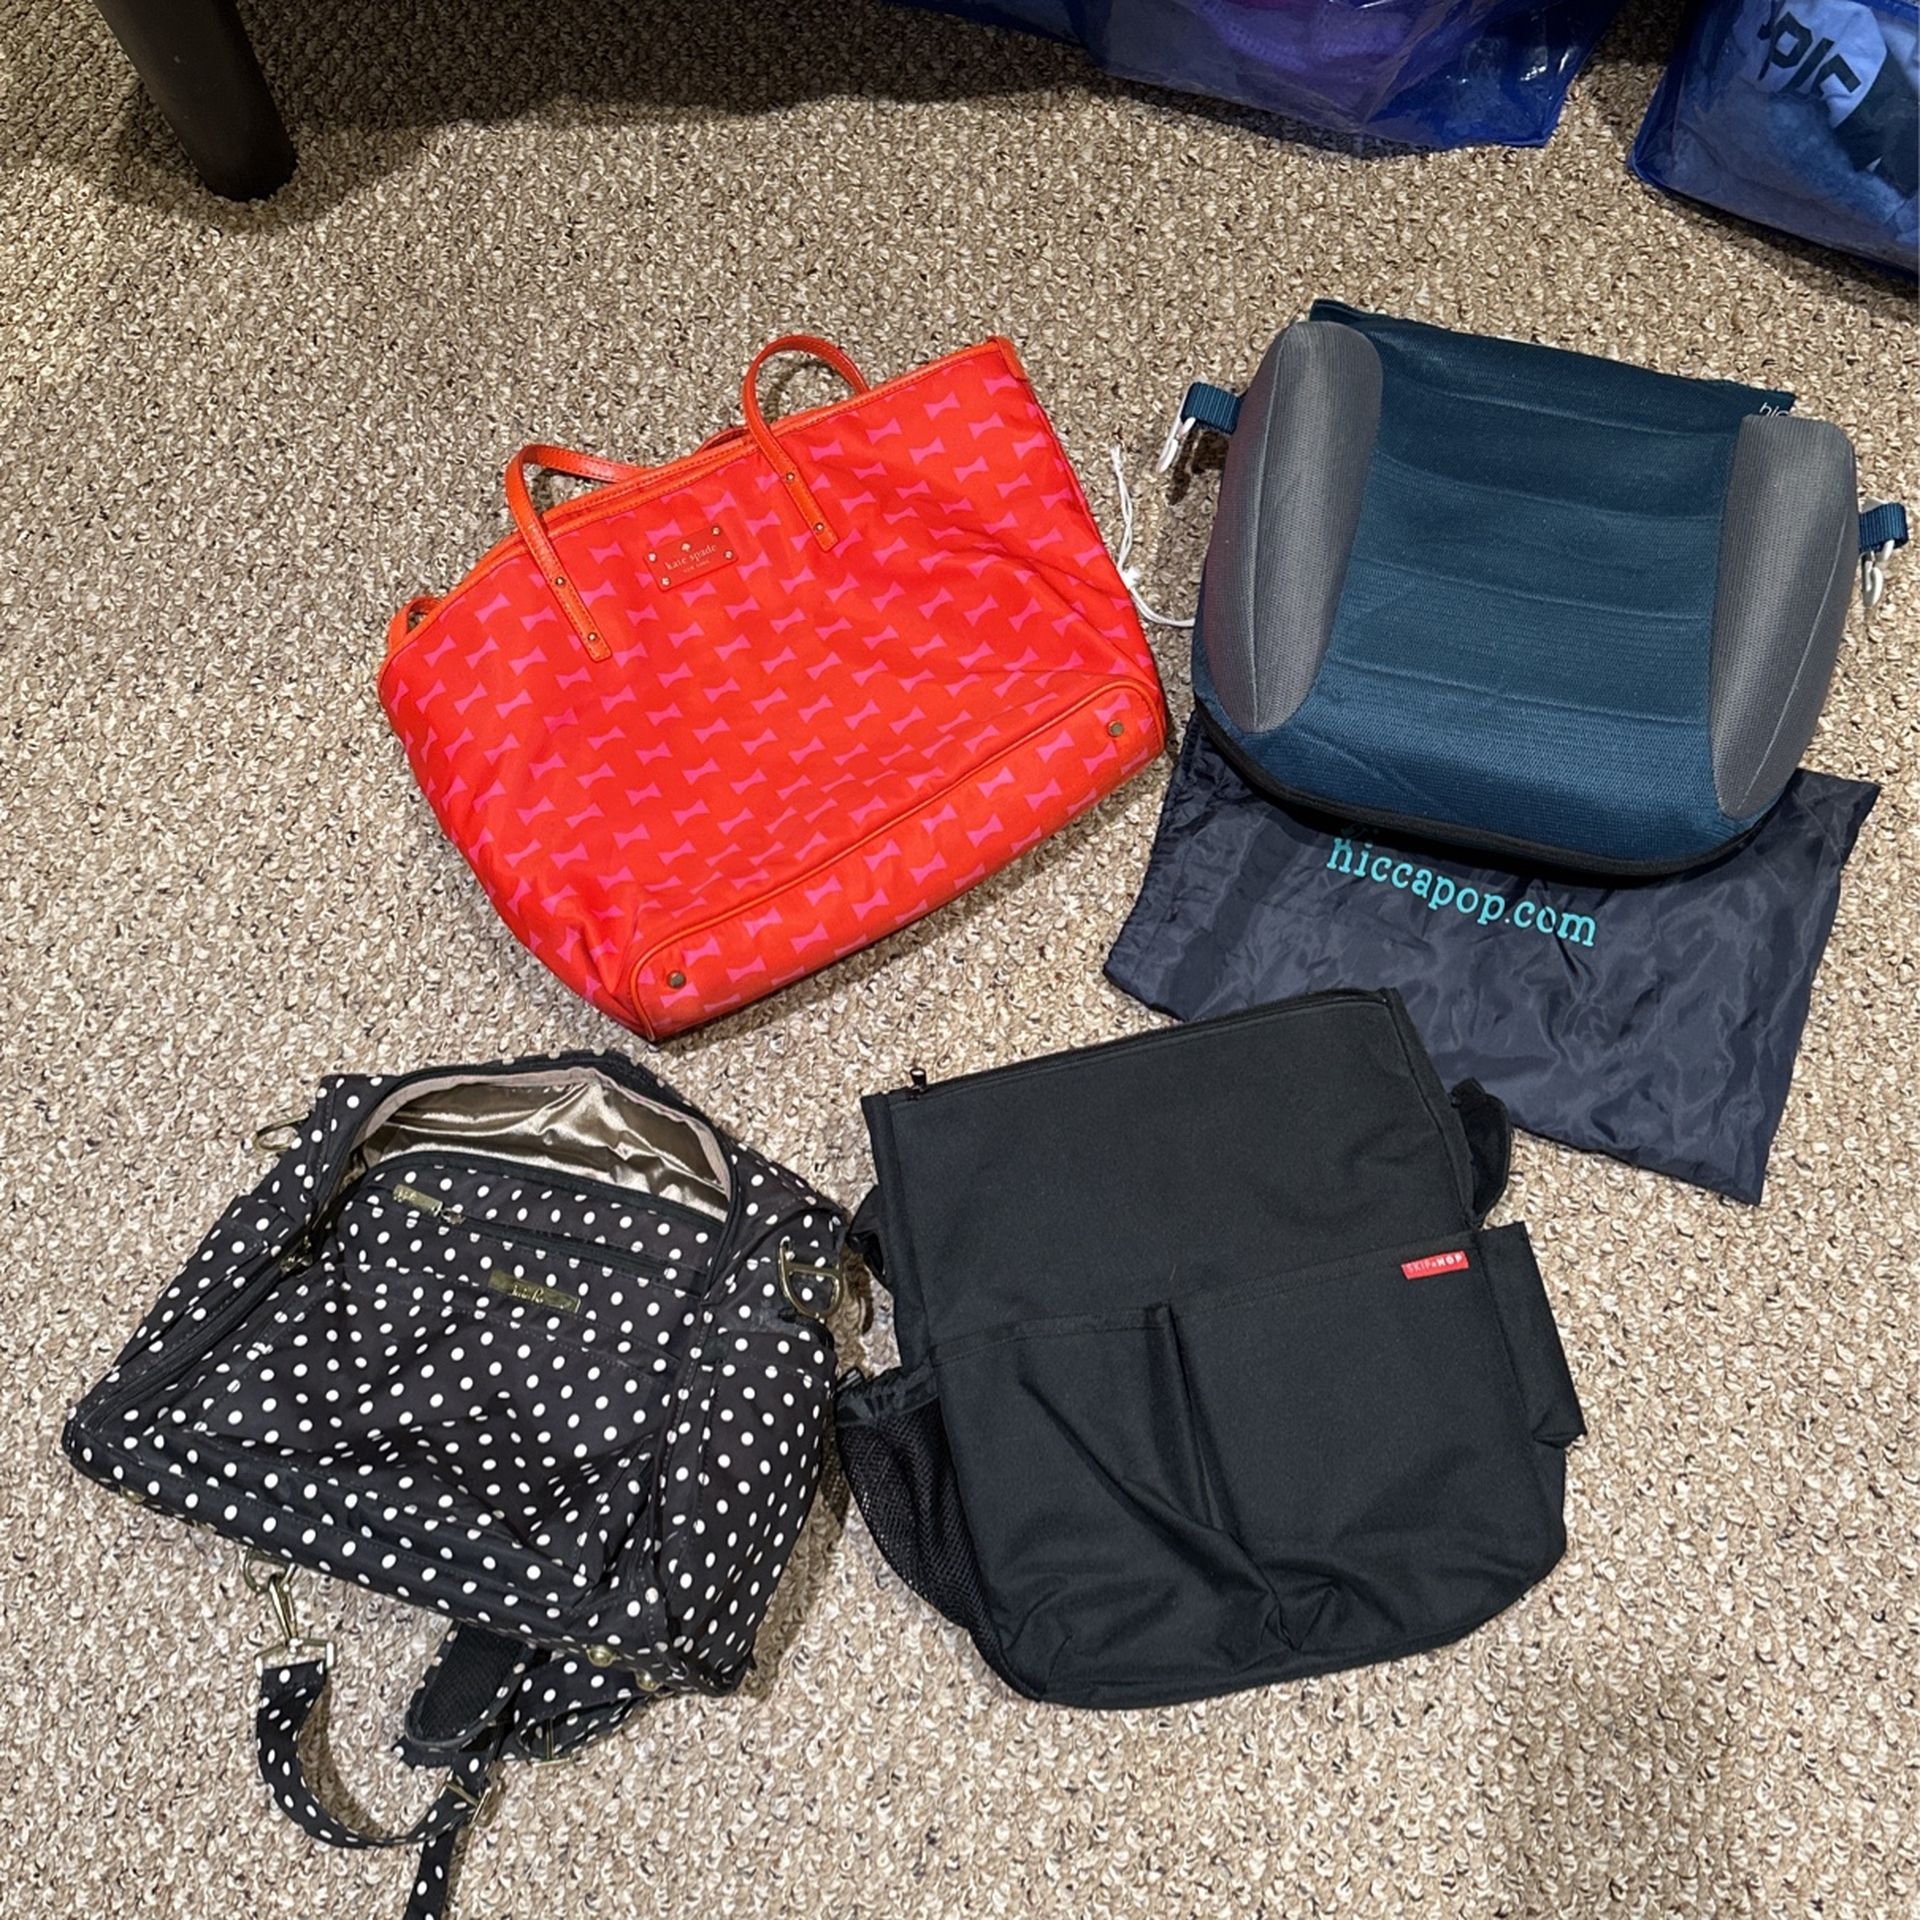 Kate Spade, Jujube And Skip Hop Diaper Bags With Booster